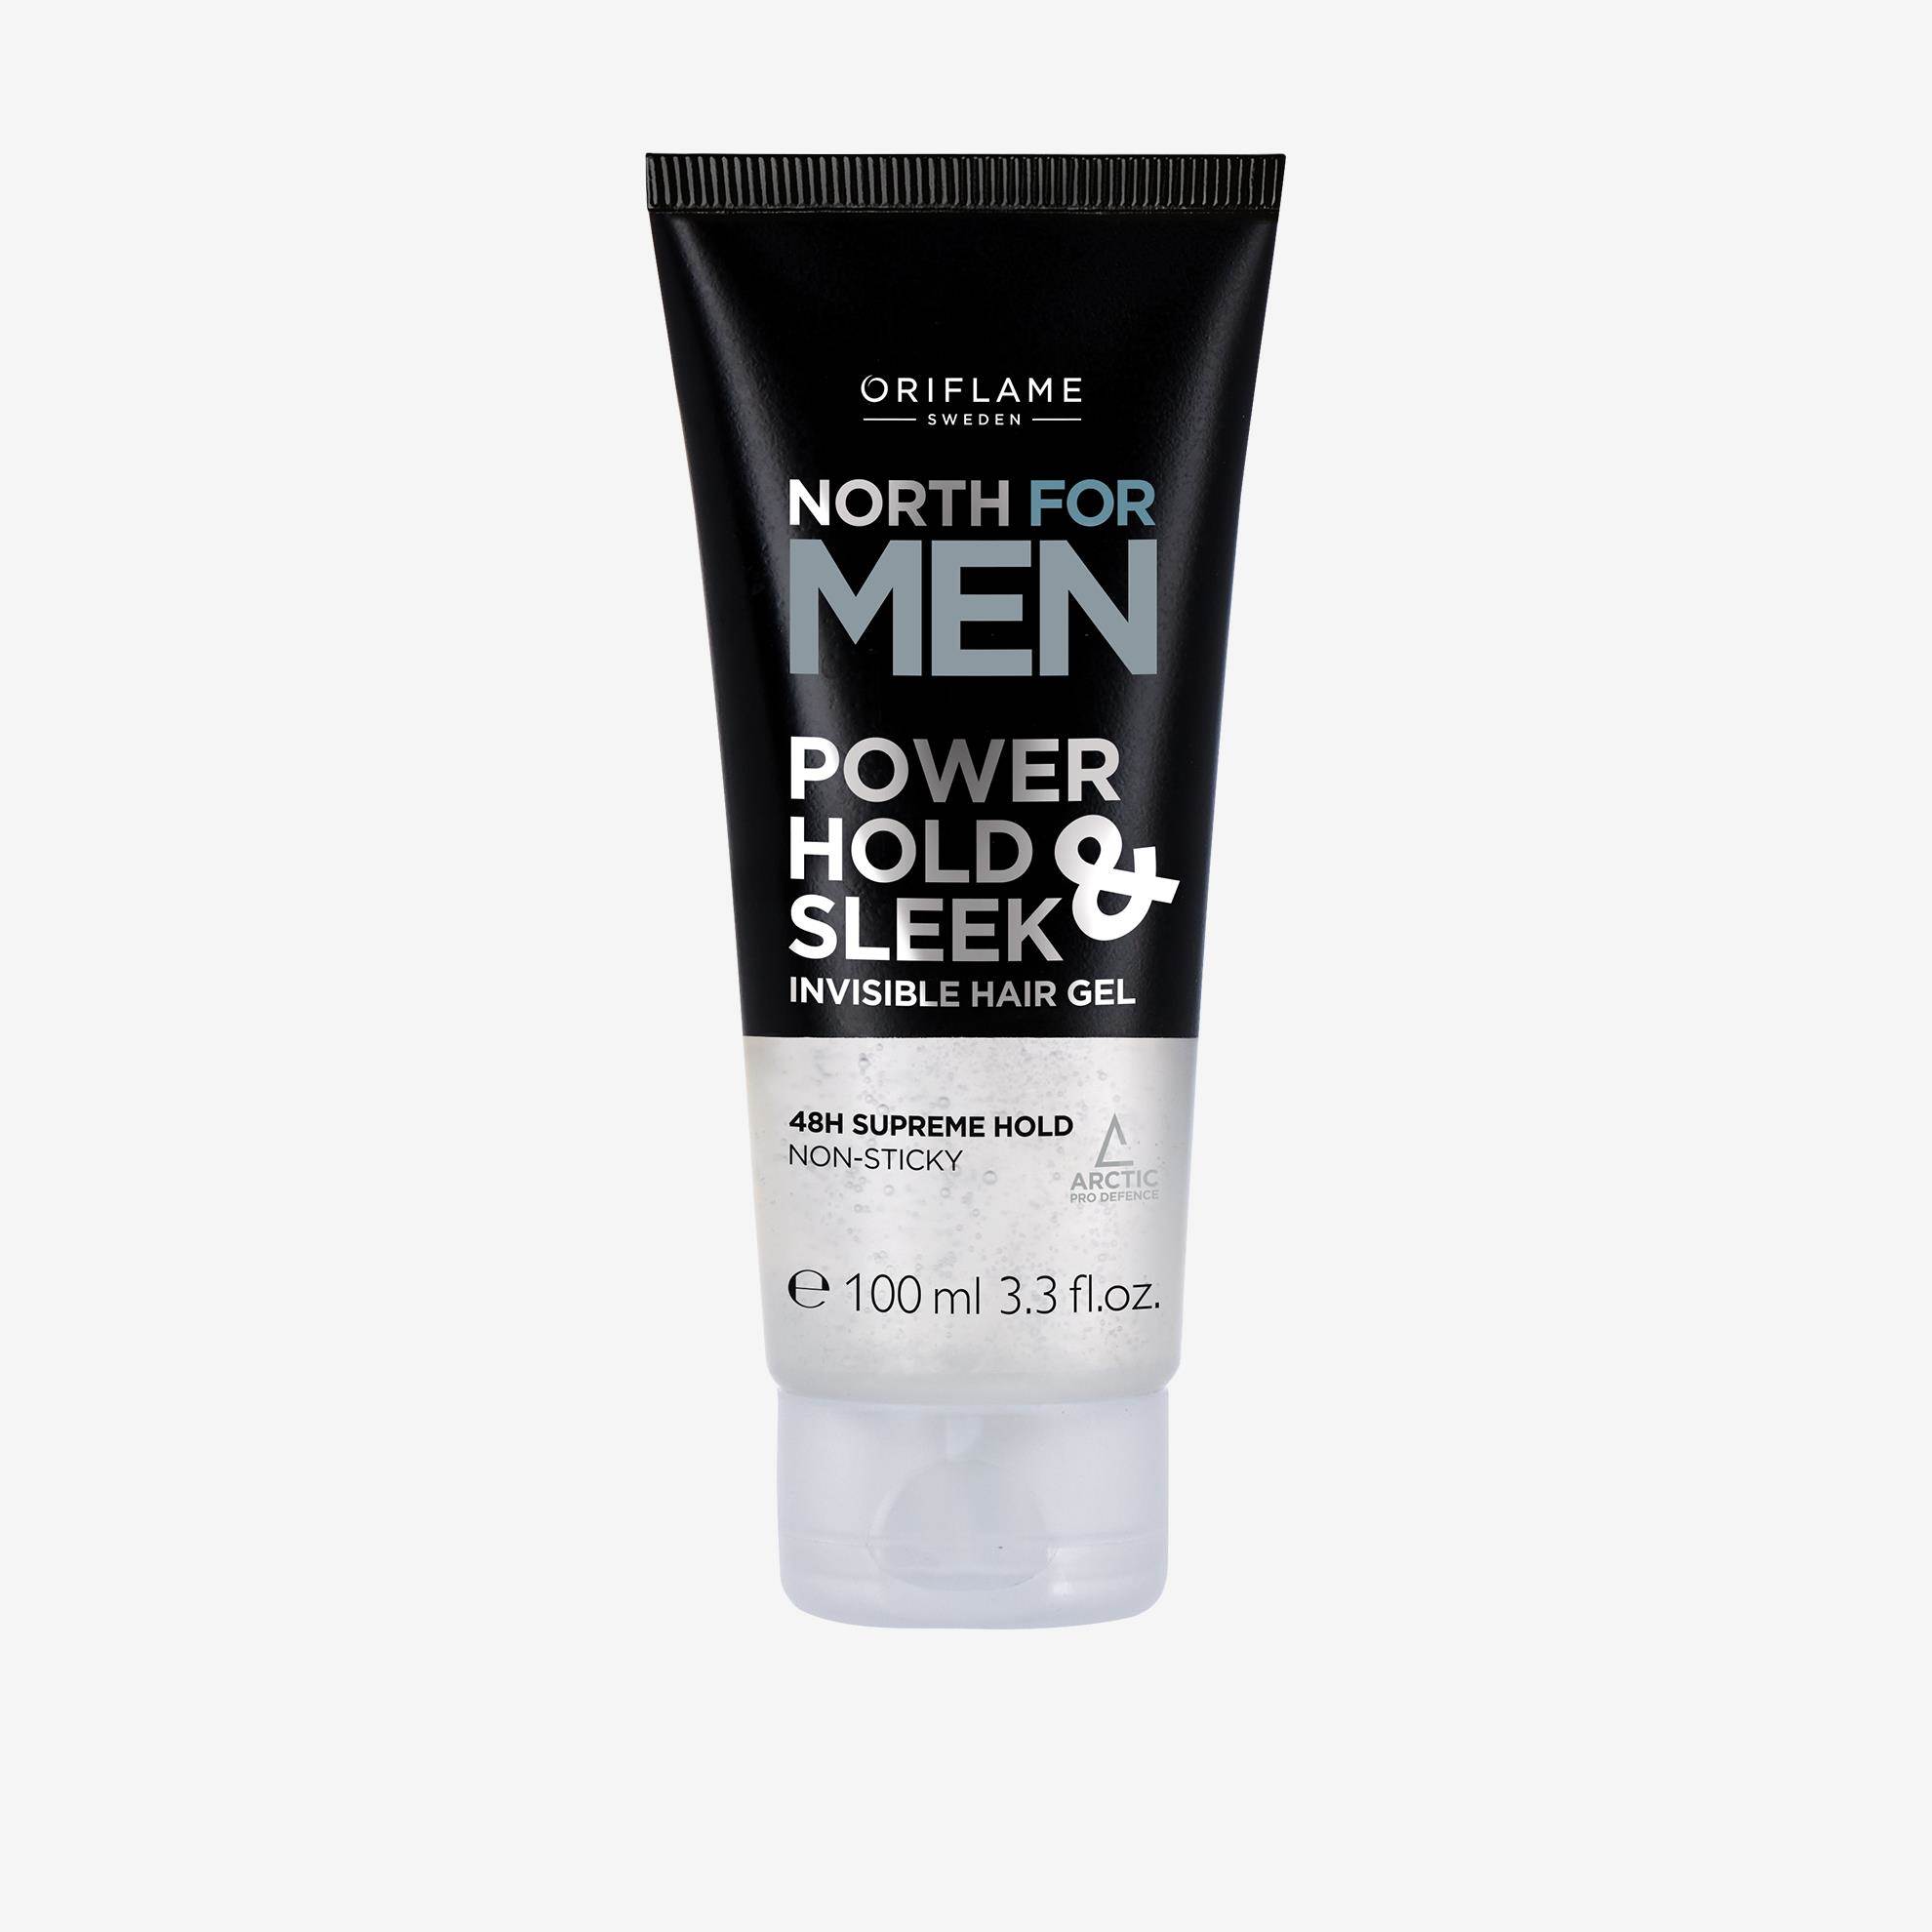 NORTH FOR MENPower Hold & Sleek Invisible Hair Gel